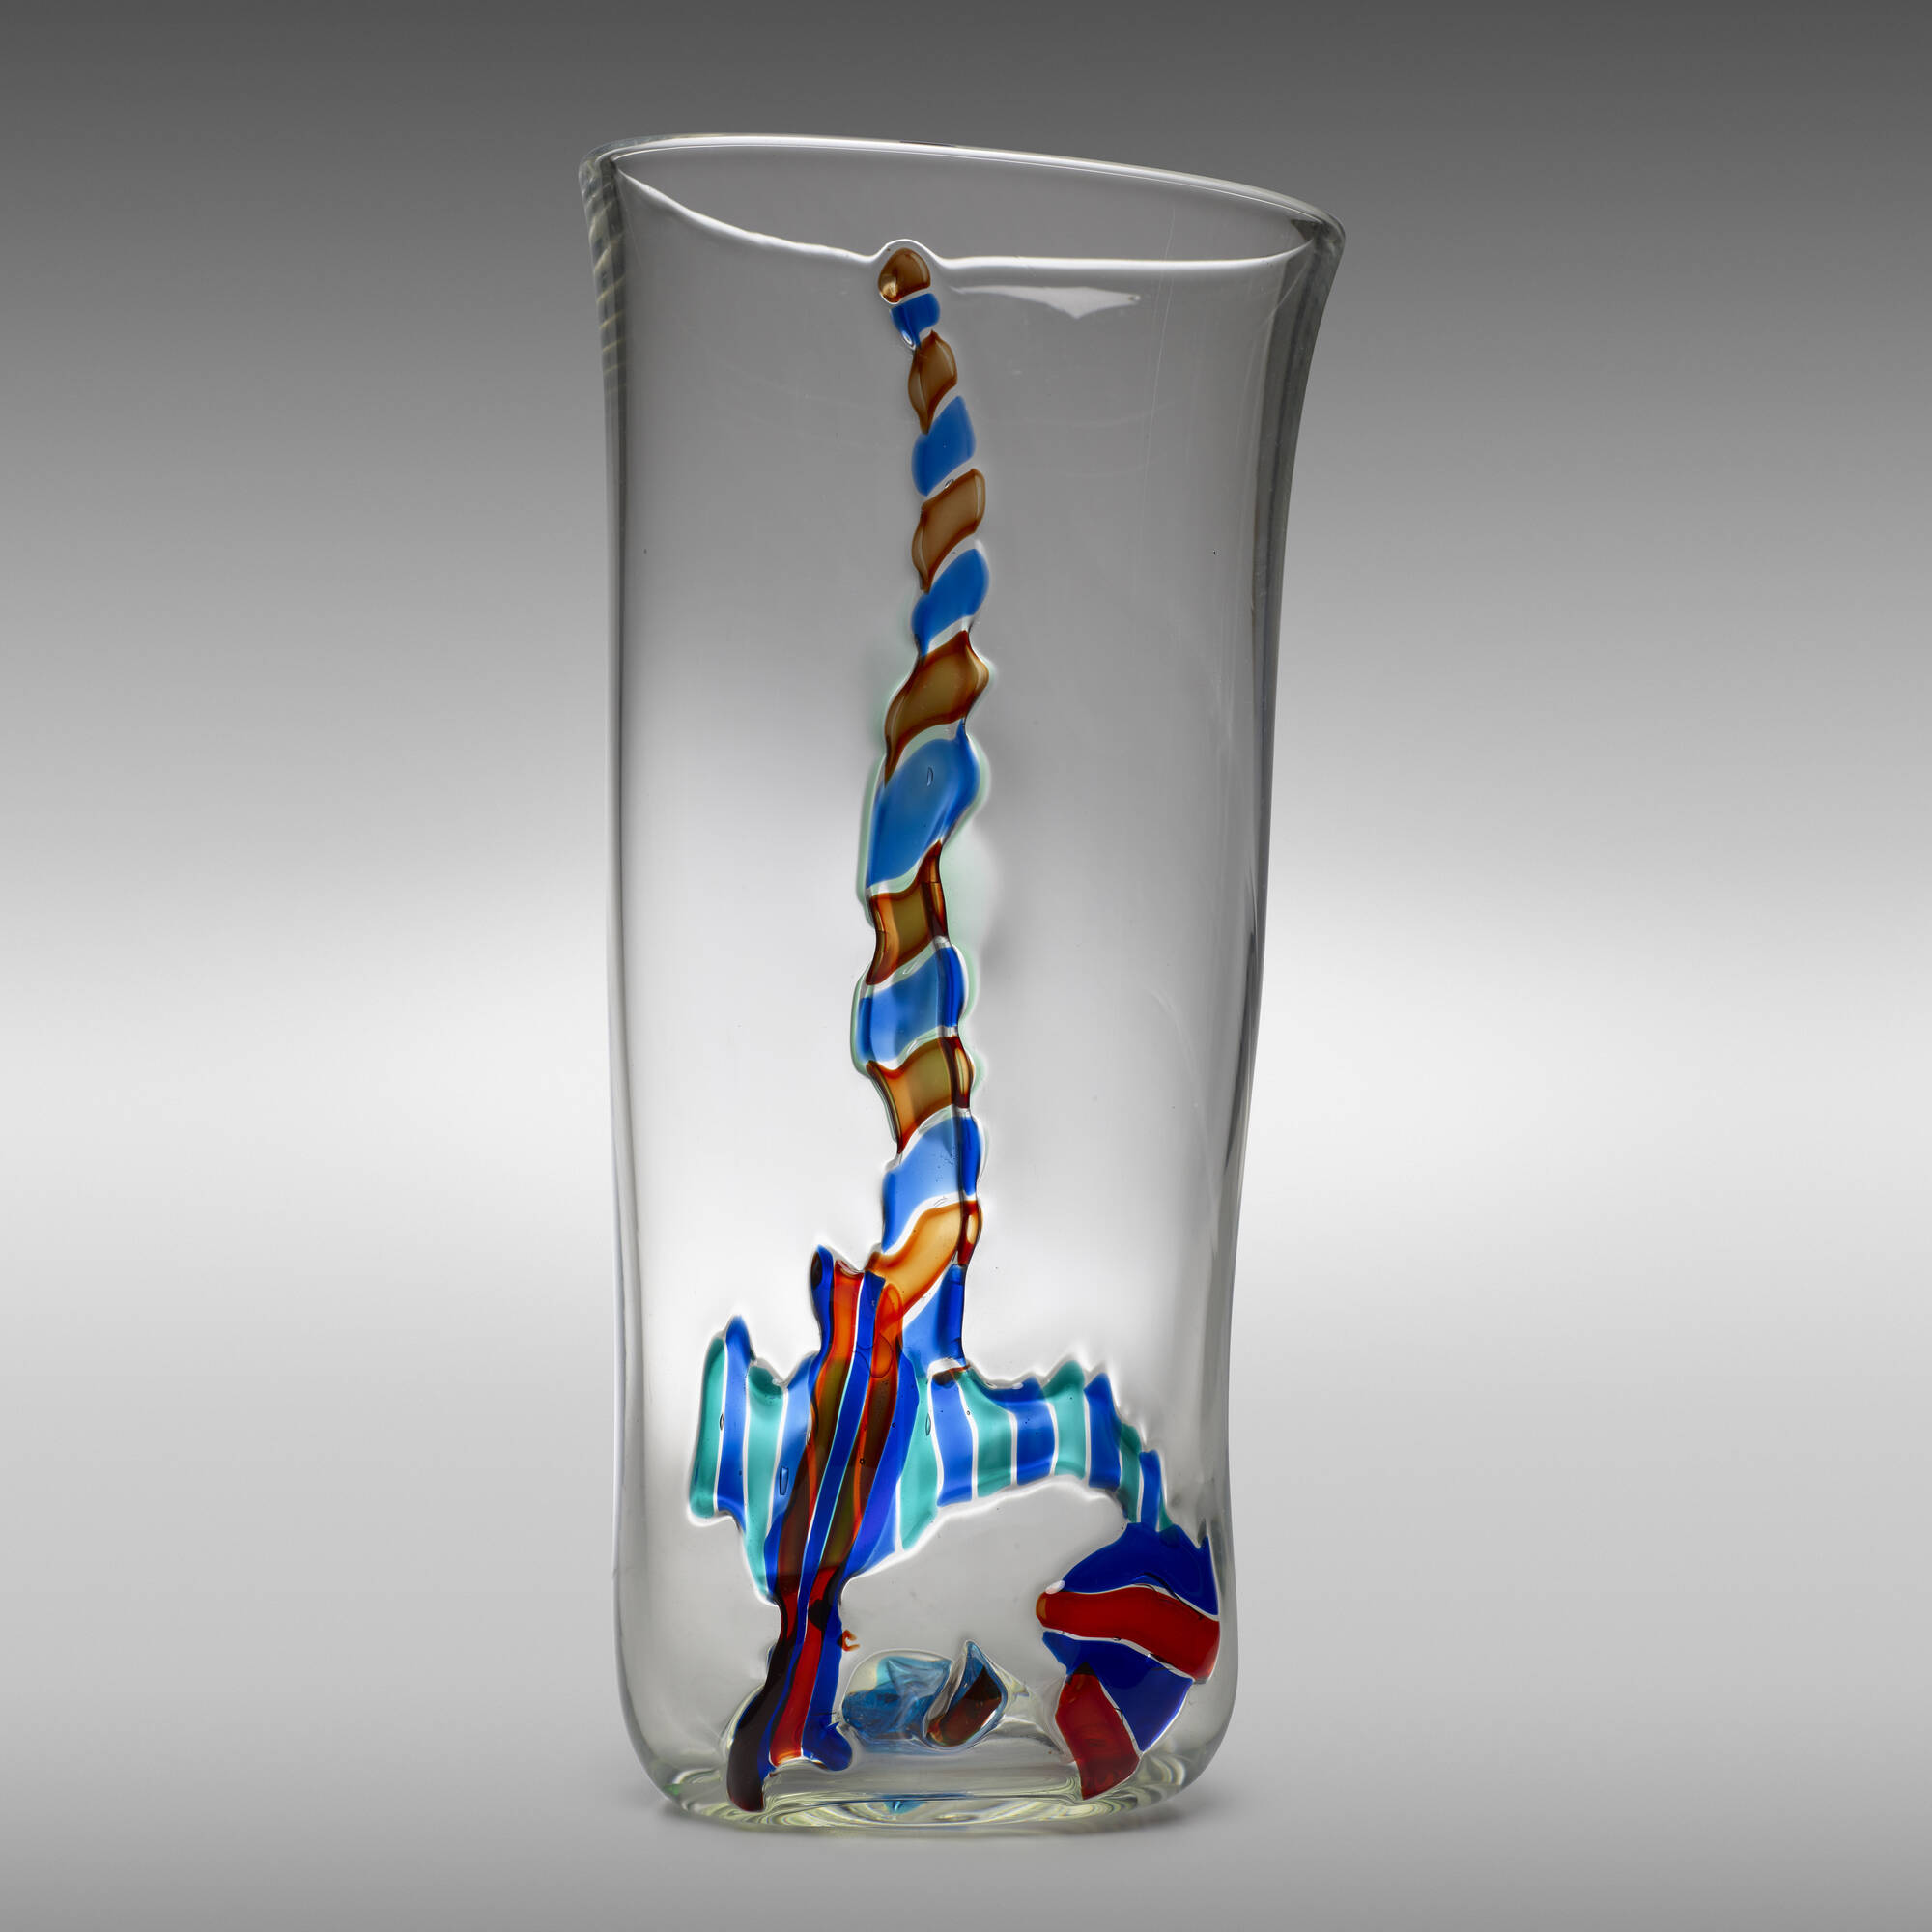 Watch How a Master Glass Blower Makes Huge Abstract Vases